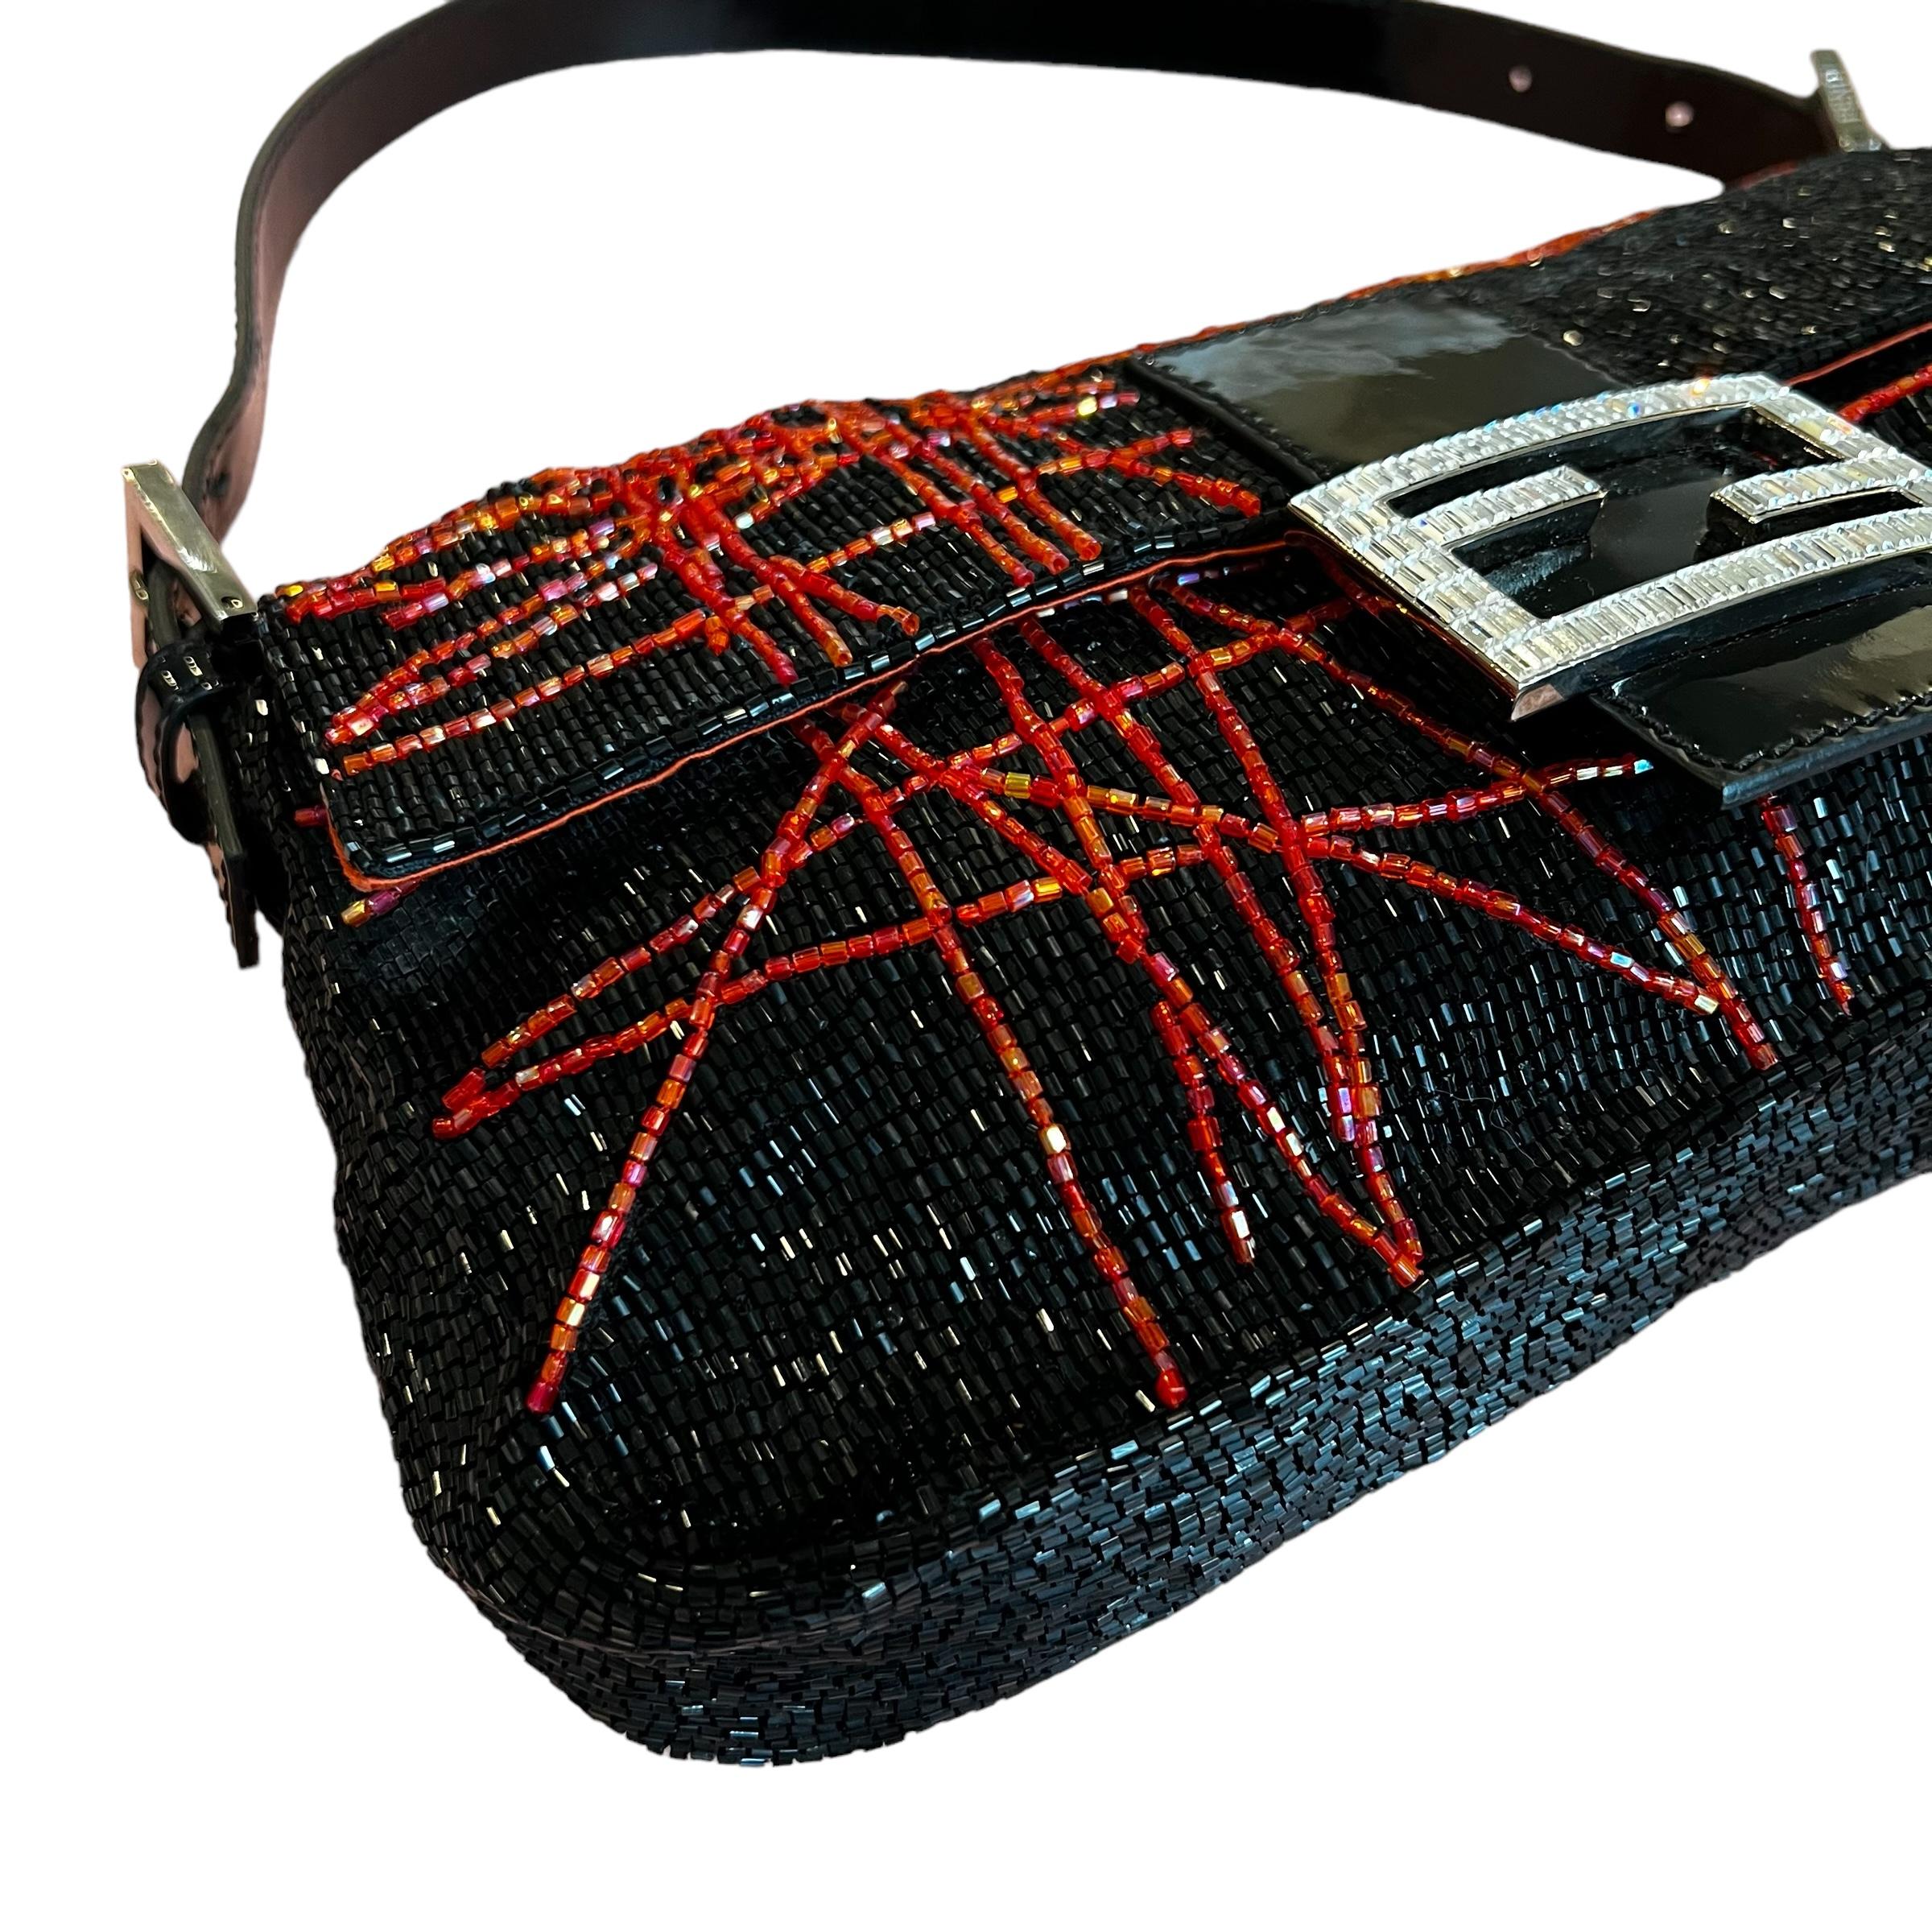 Rare Beaded Fendi Baguette Bag With Patent Leather & Swarovski Crystals For Sale 2